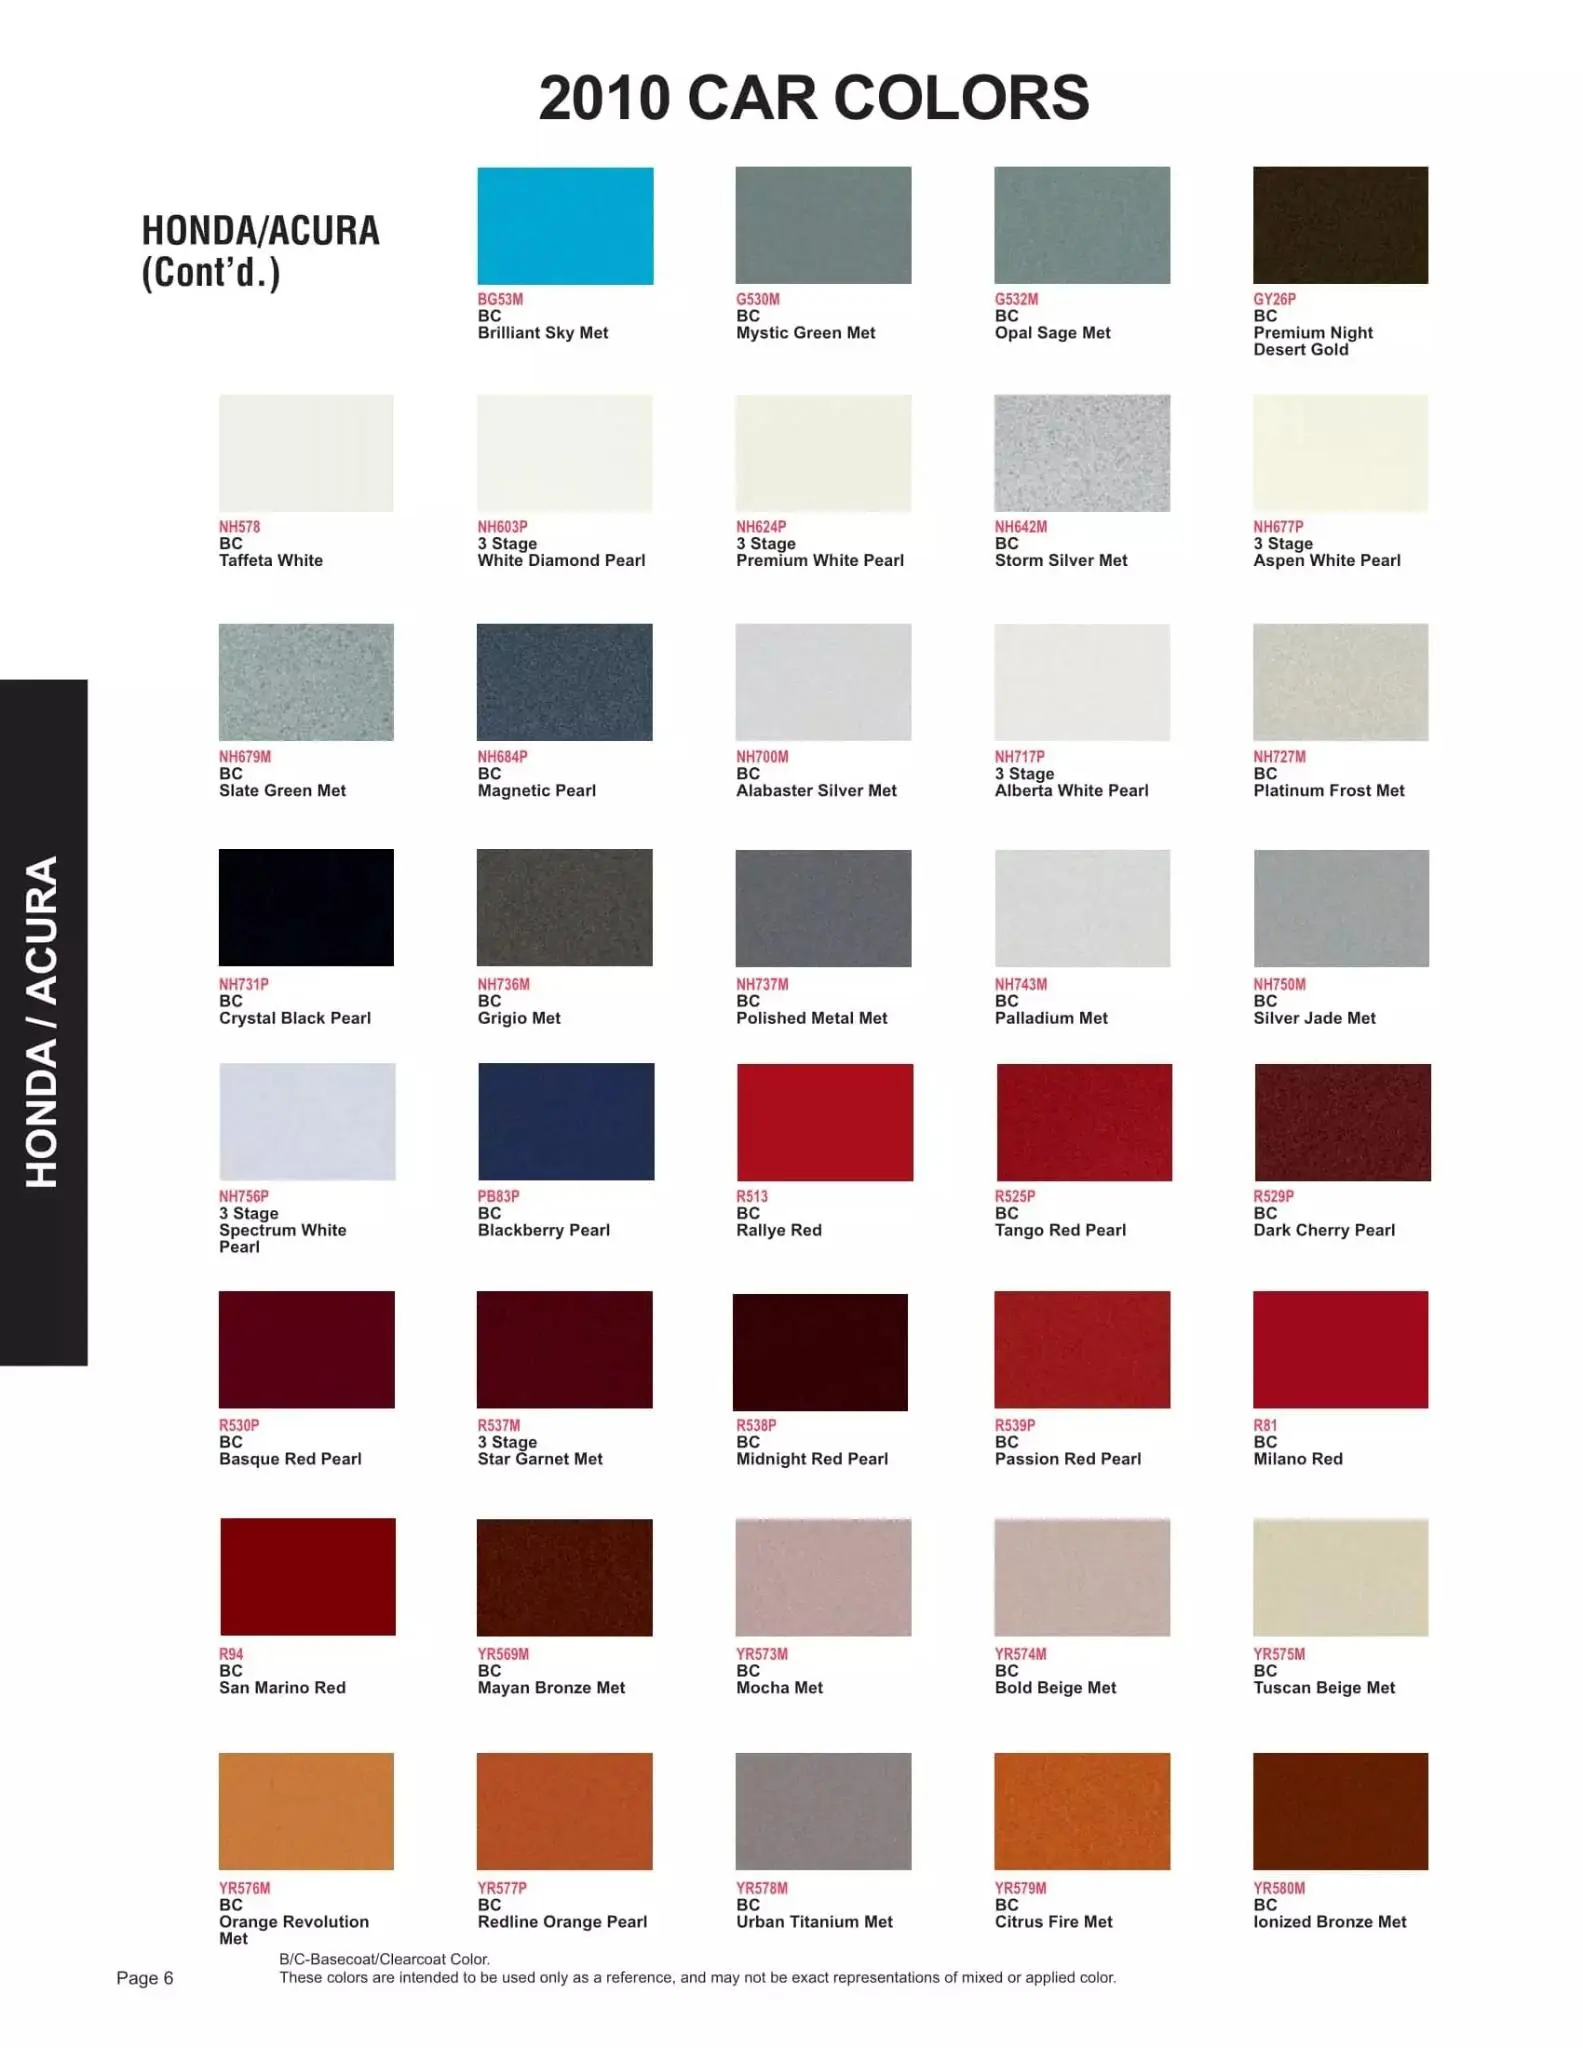 Exterior paint chips and their ordering codes for Honda and Acura Vehicles